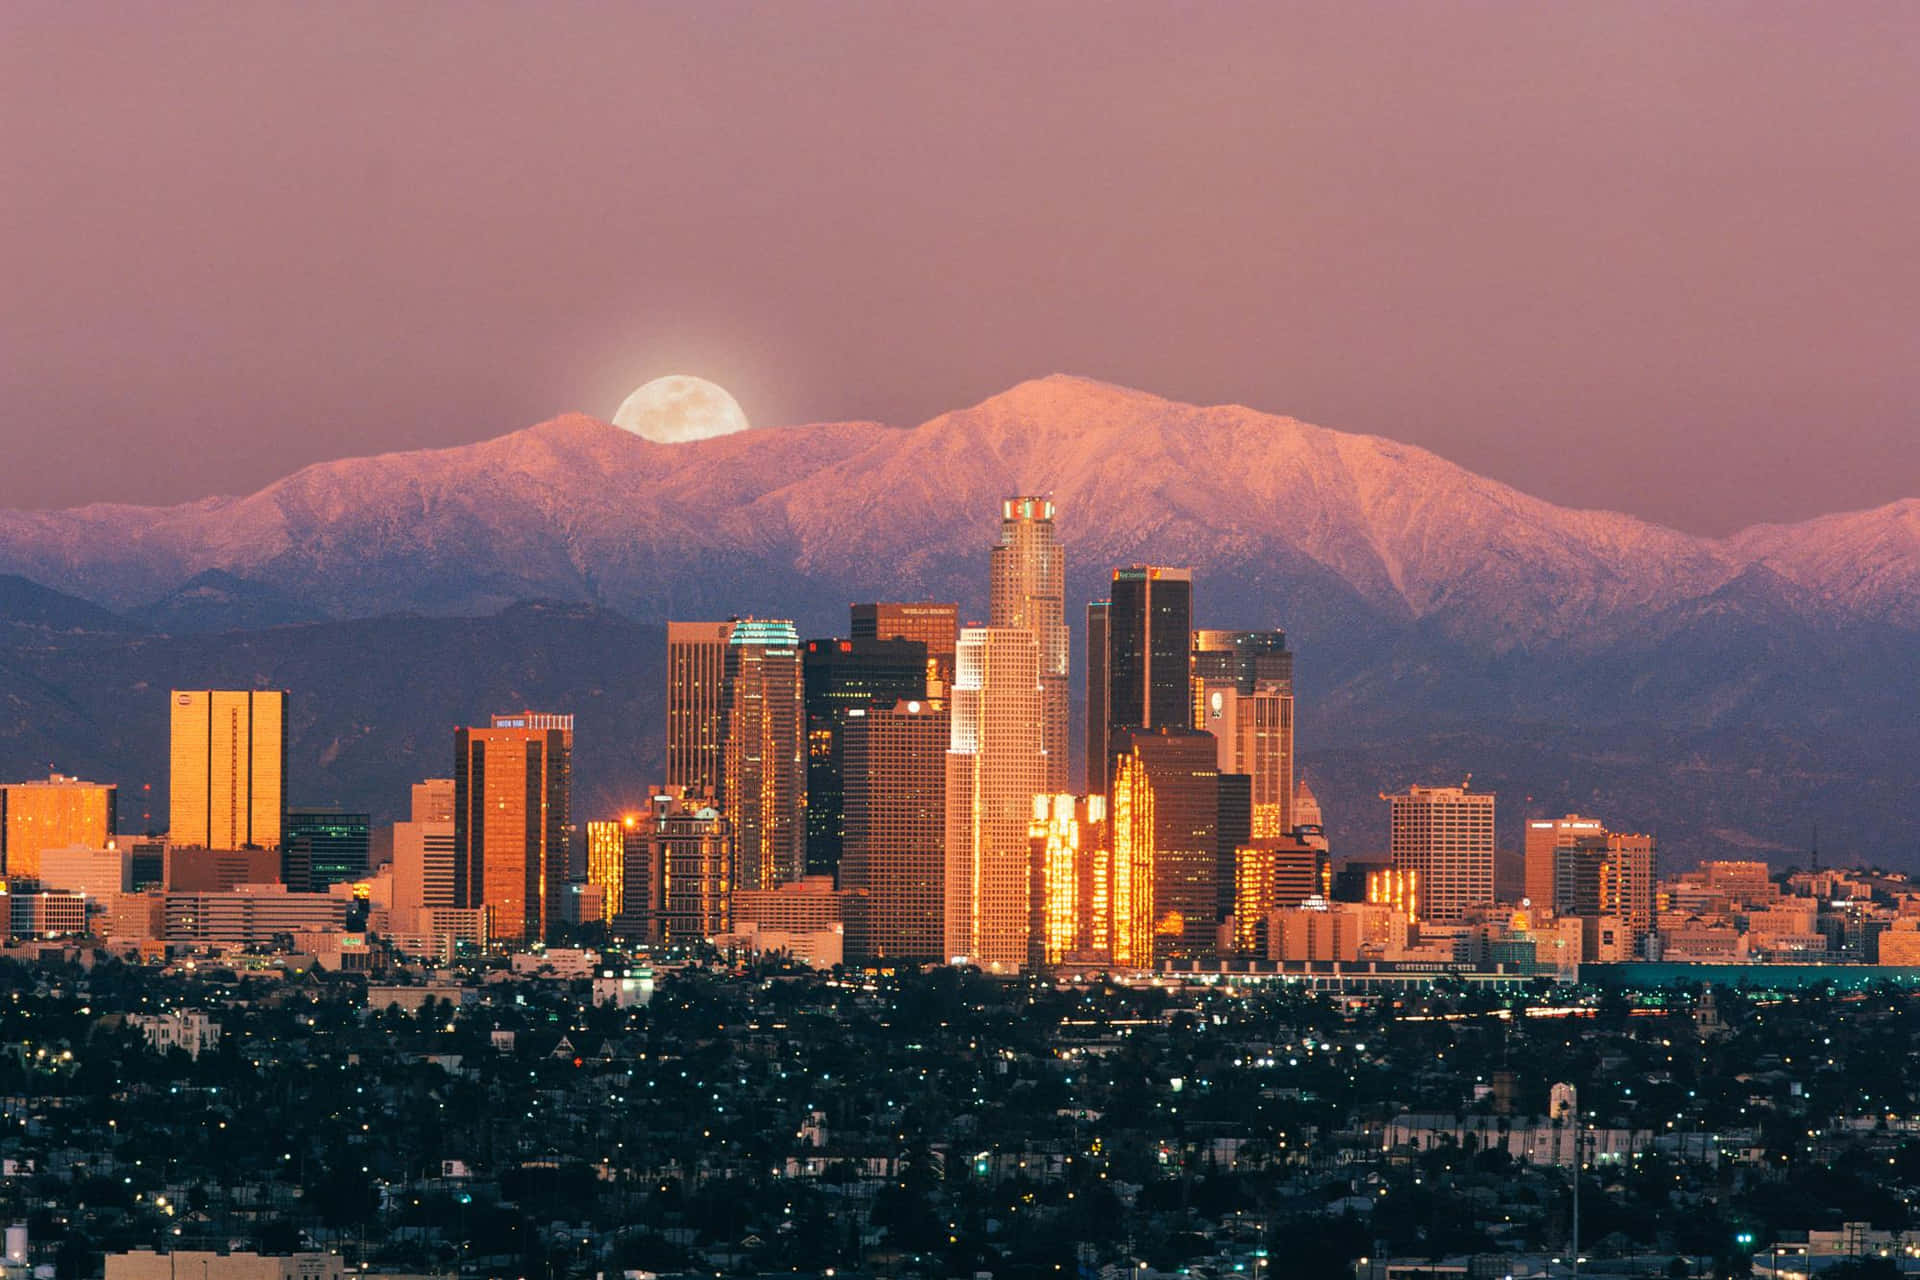 Los Angeles, the City of Angels